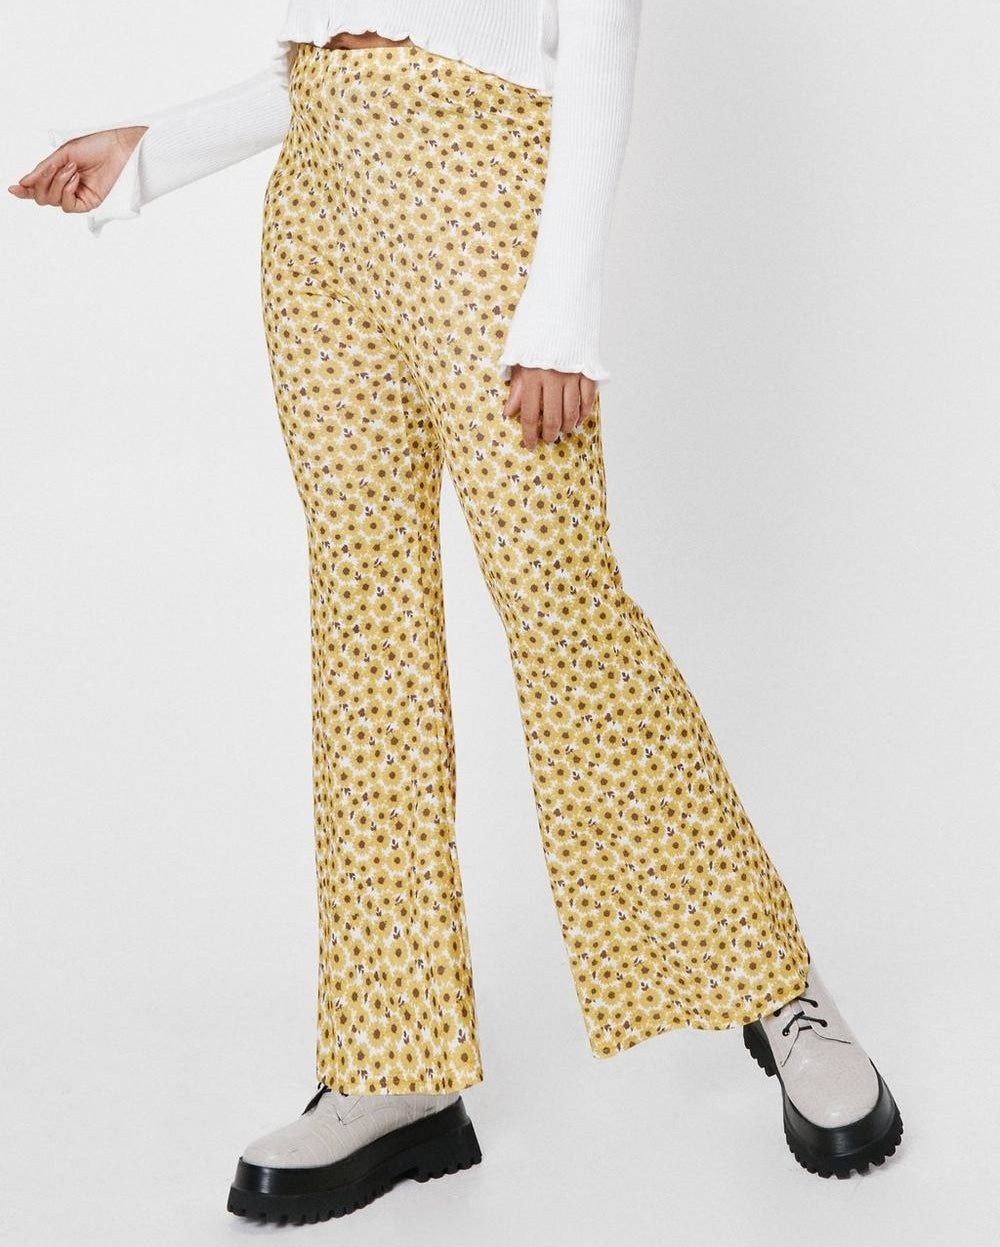 a pair of pants that flare toward the bottom with daisies patterned all over 